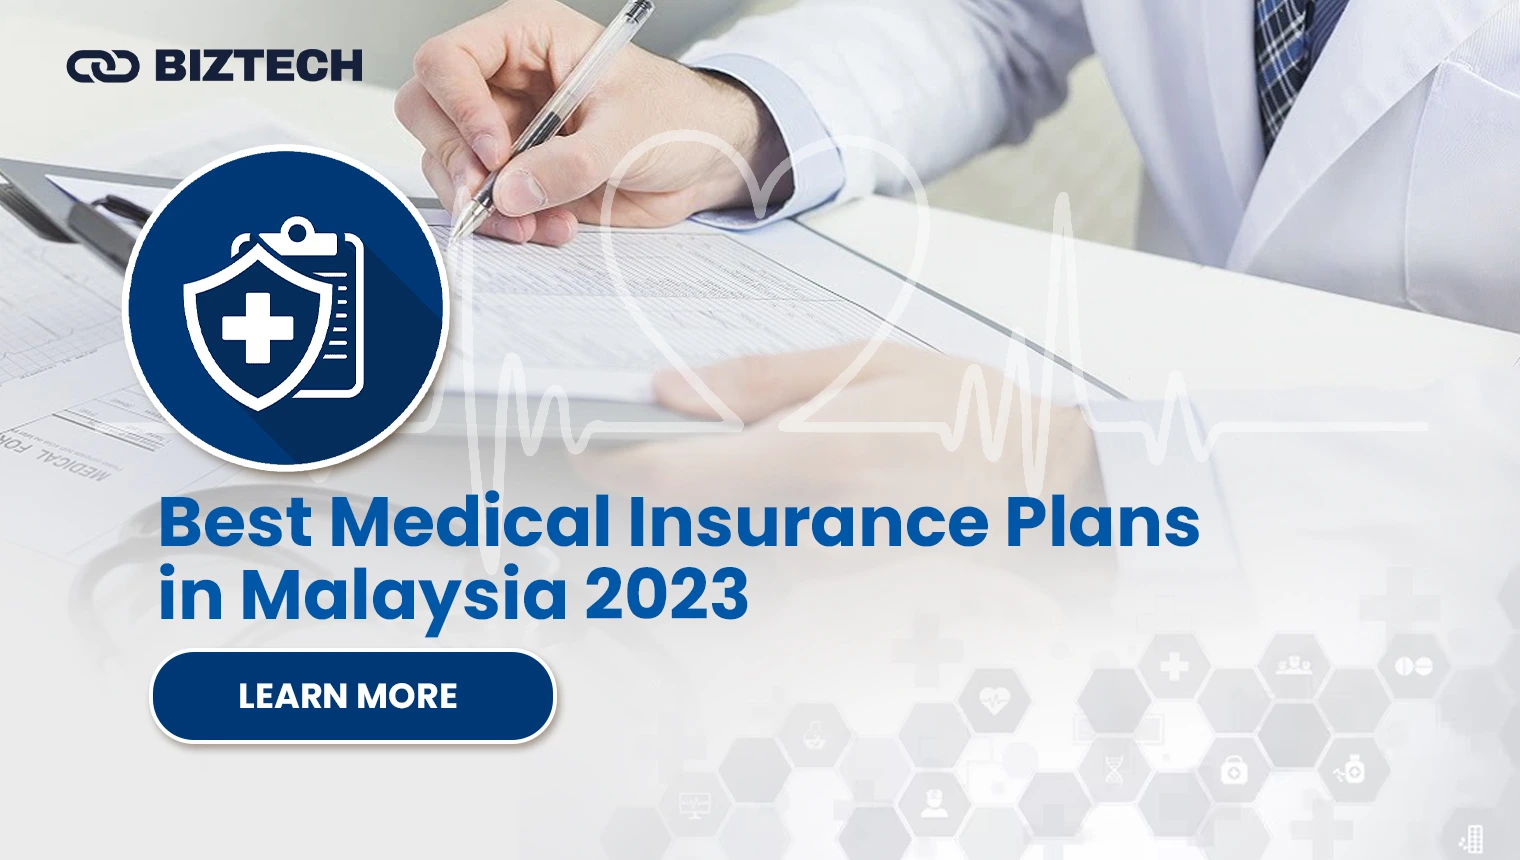 Best Medical Insurance Plans in Malaysia 2023